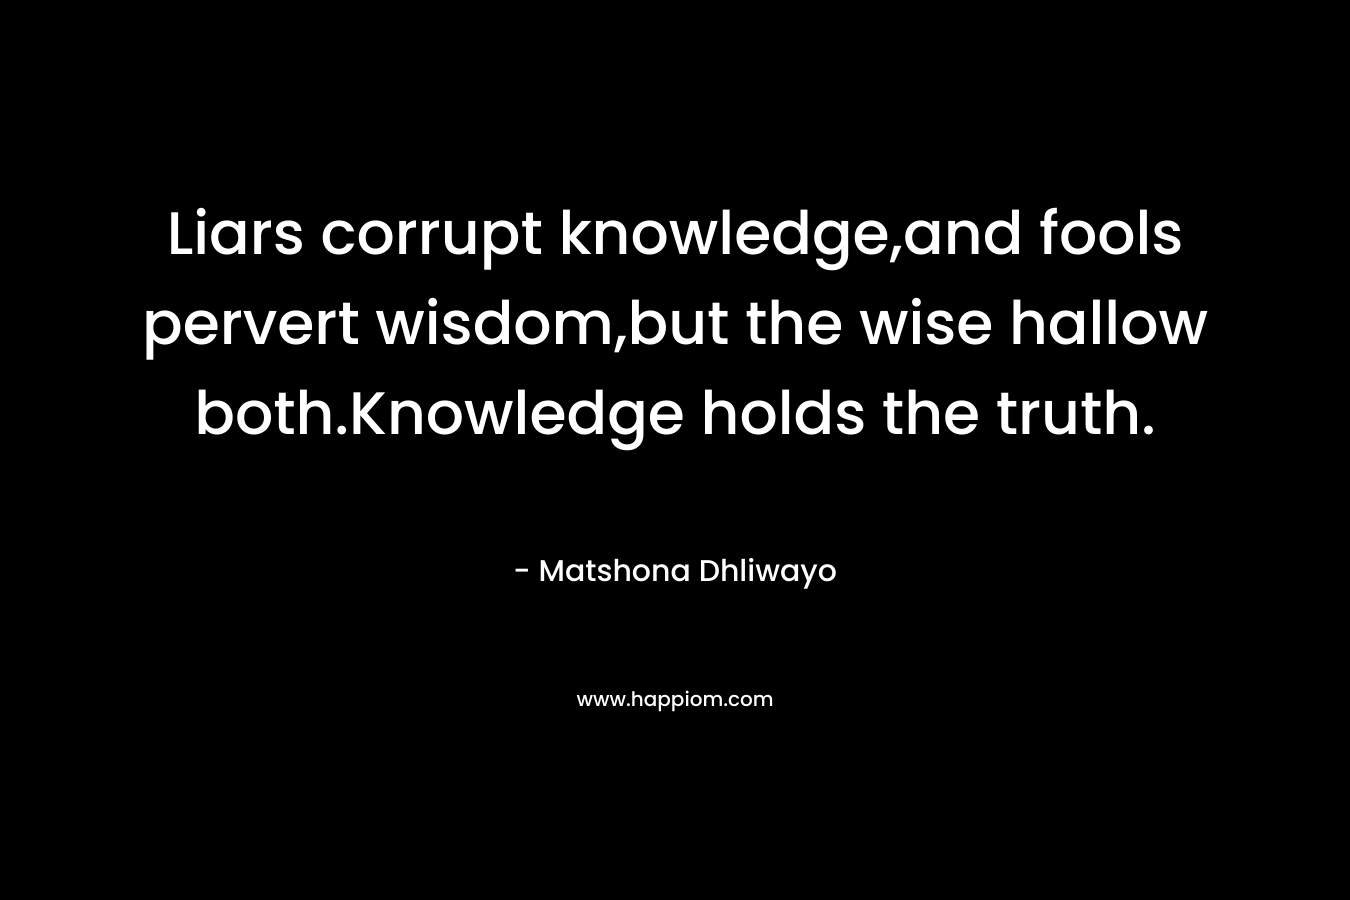 Liars corrupt knowledge,and fools pervert wisdom,but the wise hallow both.Knowledge holds the truth.